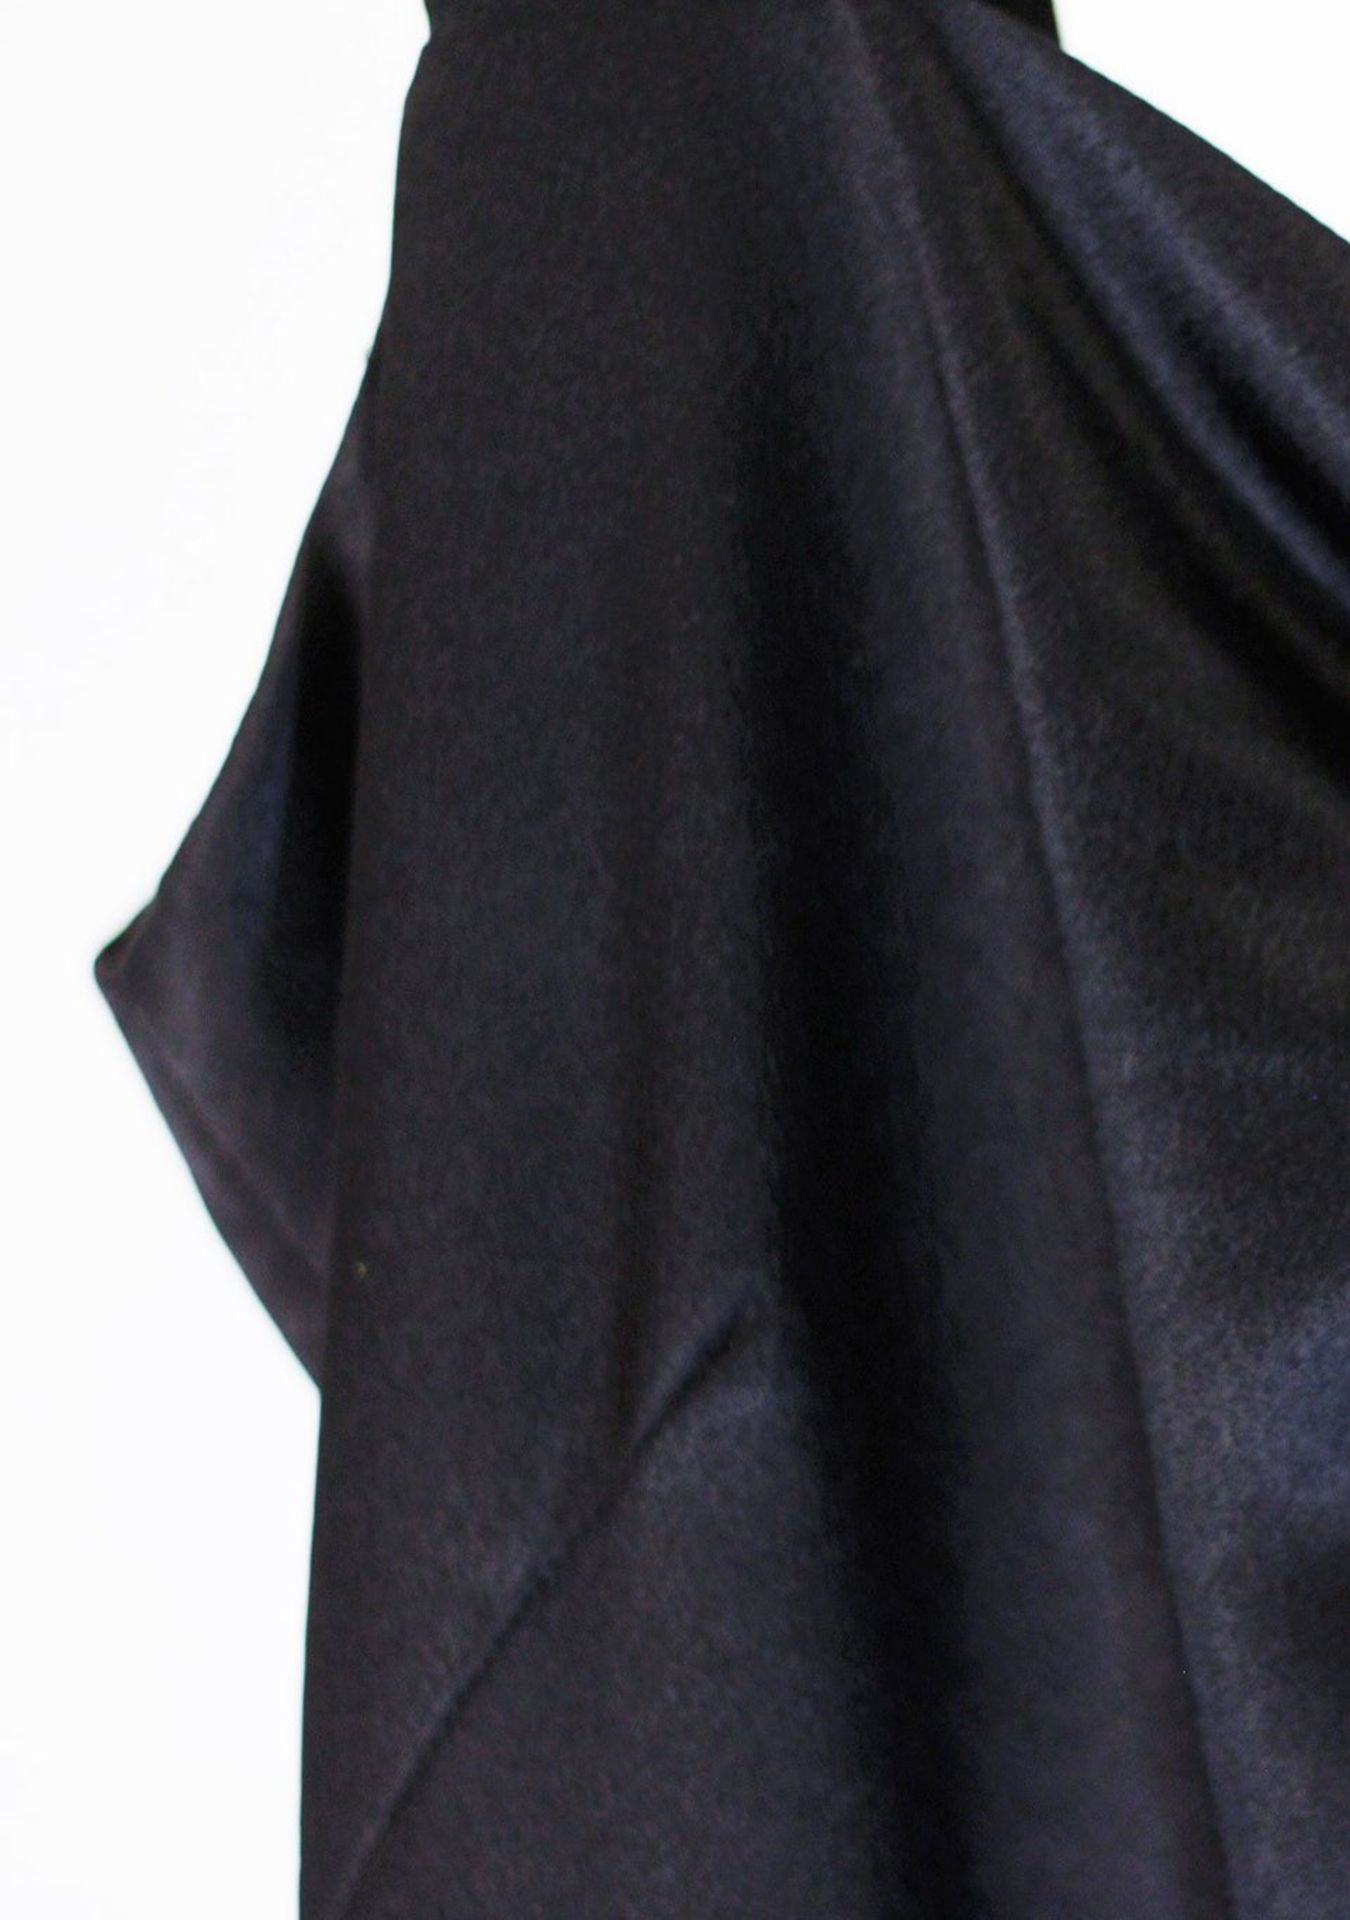 1 x Buetow Black Dress - Size: 20 - Material: 100% Viscose - From a High End Clothing Boutique In - Image 4 of 8